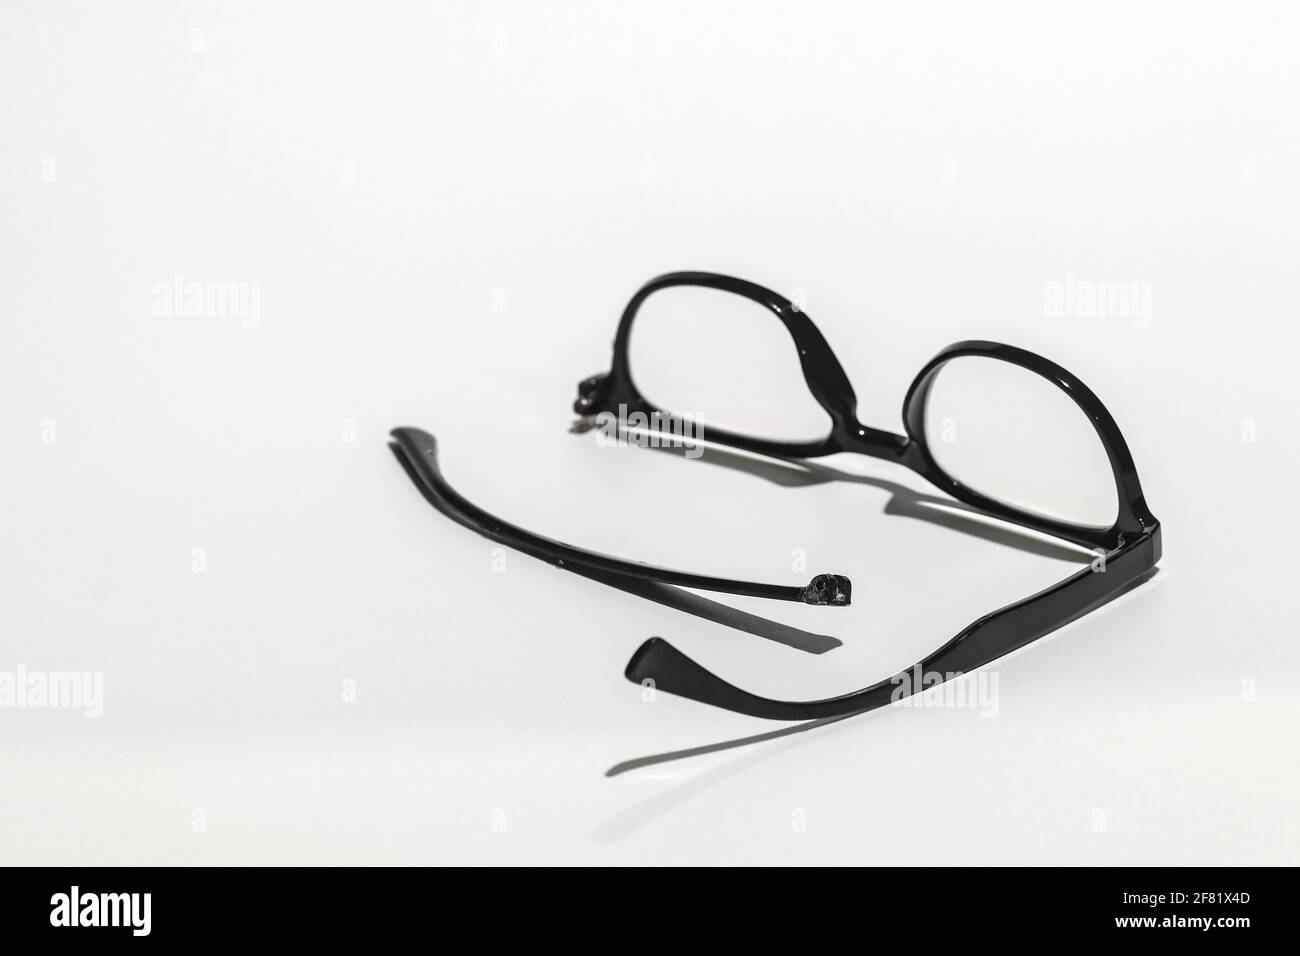 The glasses are damaged, the parts are separated. Stock Photo